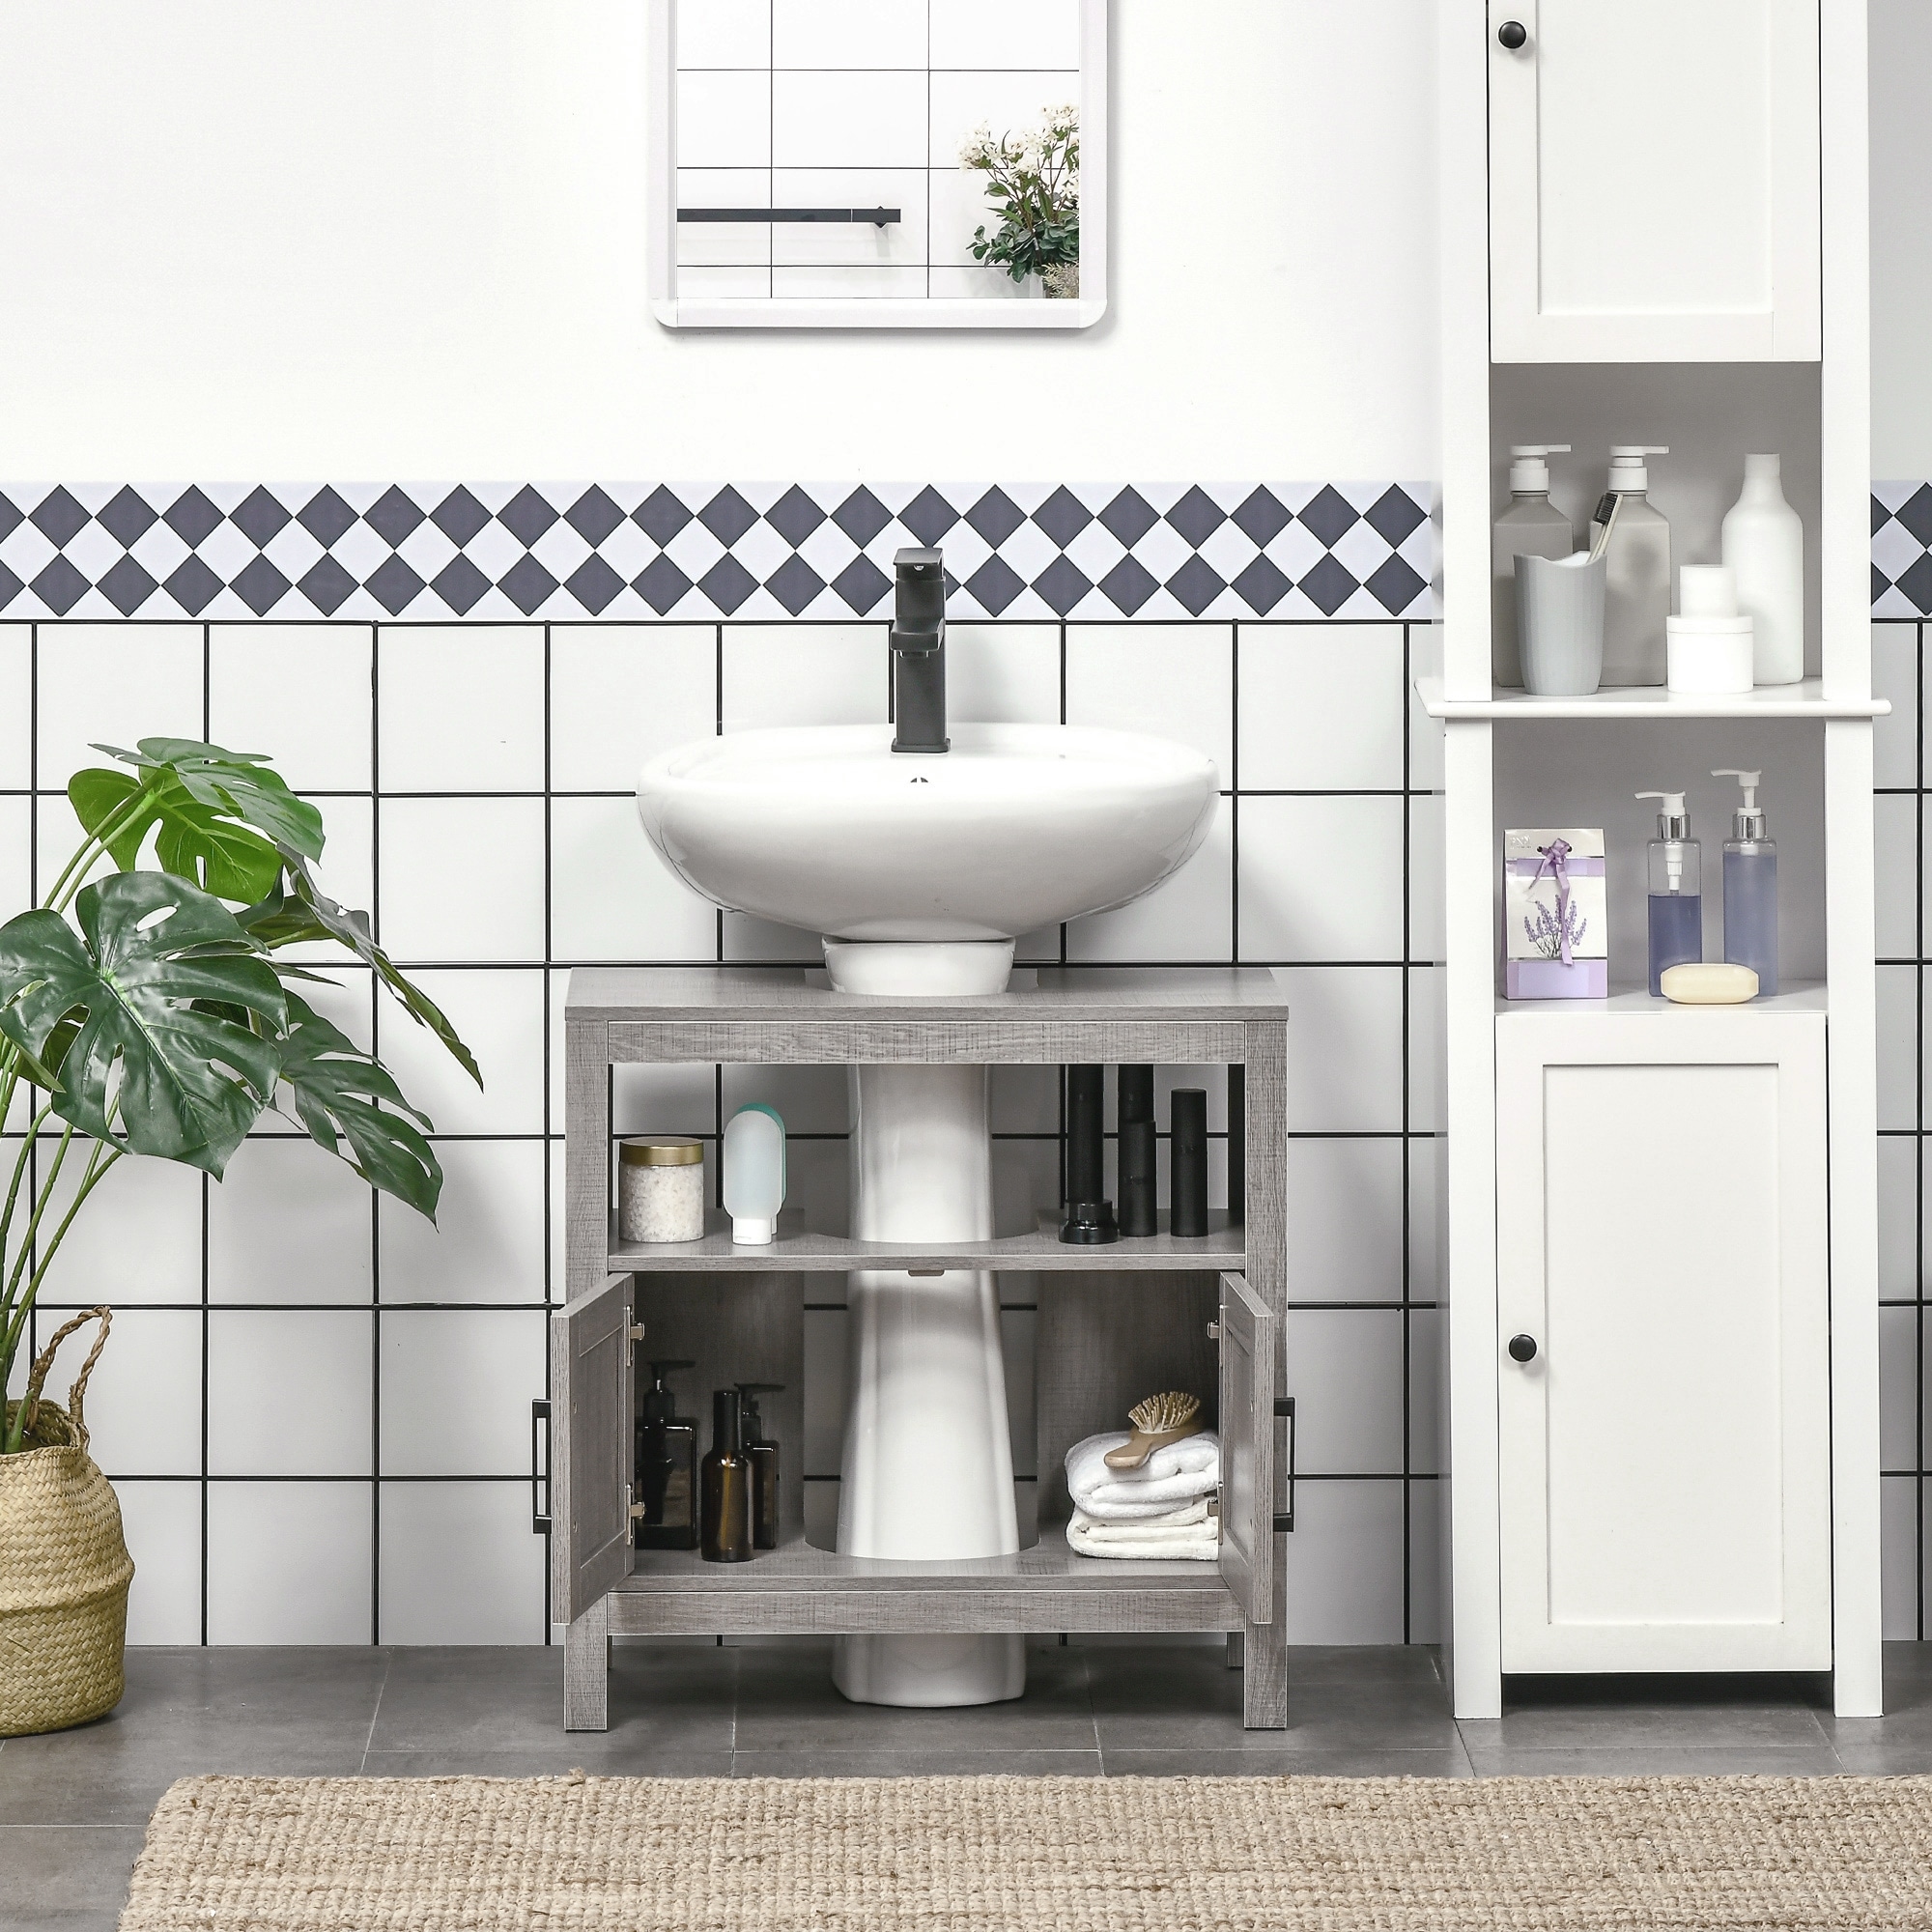 https://ak1.ostkcdn.com/images/products/is/images/direct/1cfbe21ccab0e99e2cbf2b4dede82a2388773900/kleankin-Pedestal-Sink-Storage-Cabinet%2C-Bathroom-Sink-Cabinet-with-Doors-and-Open-Shelf%2C-Bathroom-Vanity%2C-Space-Saver-Organizer.jpg